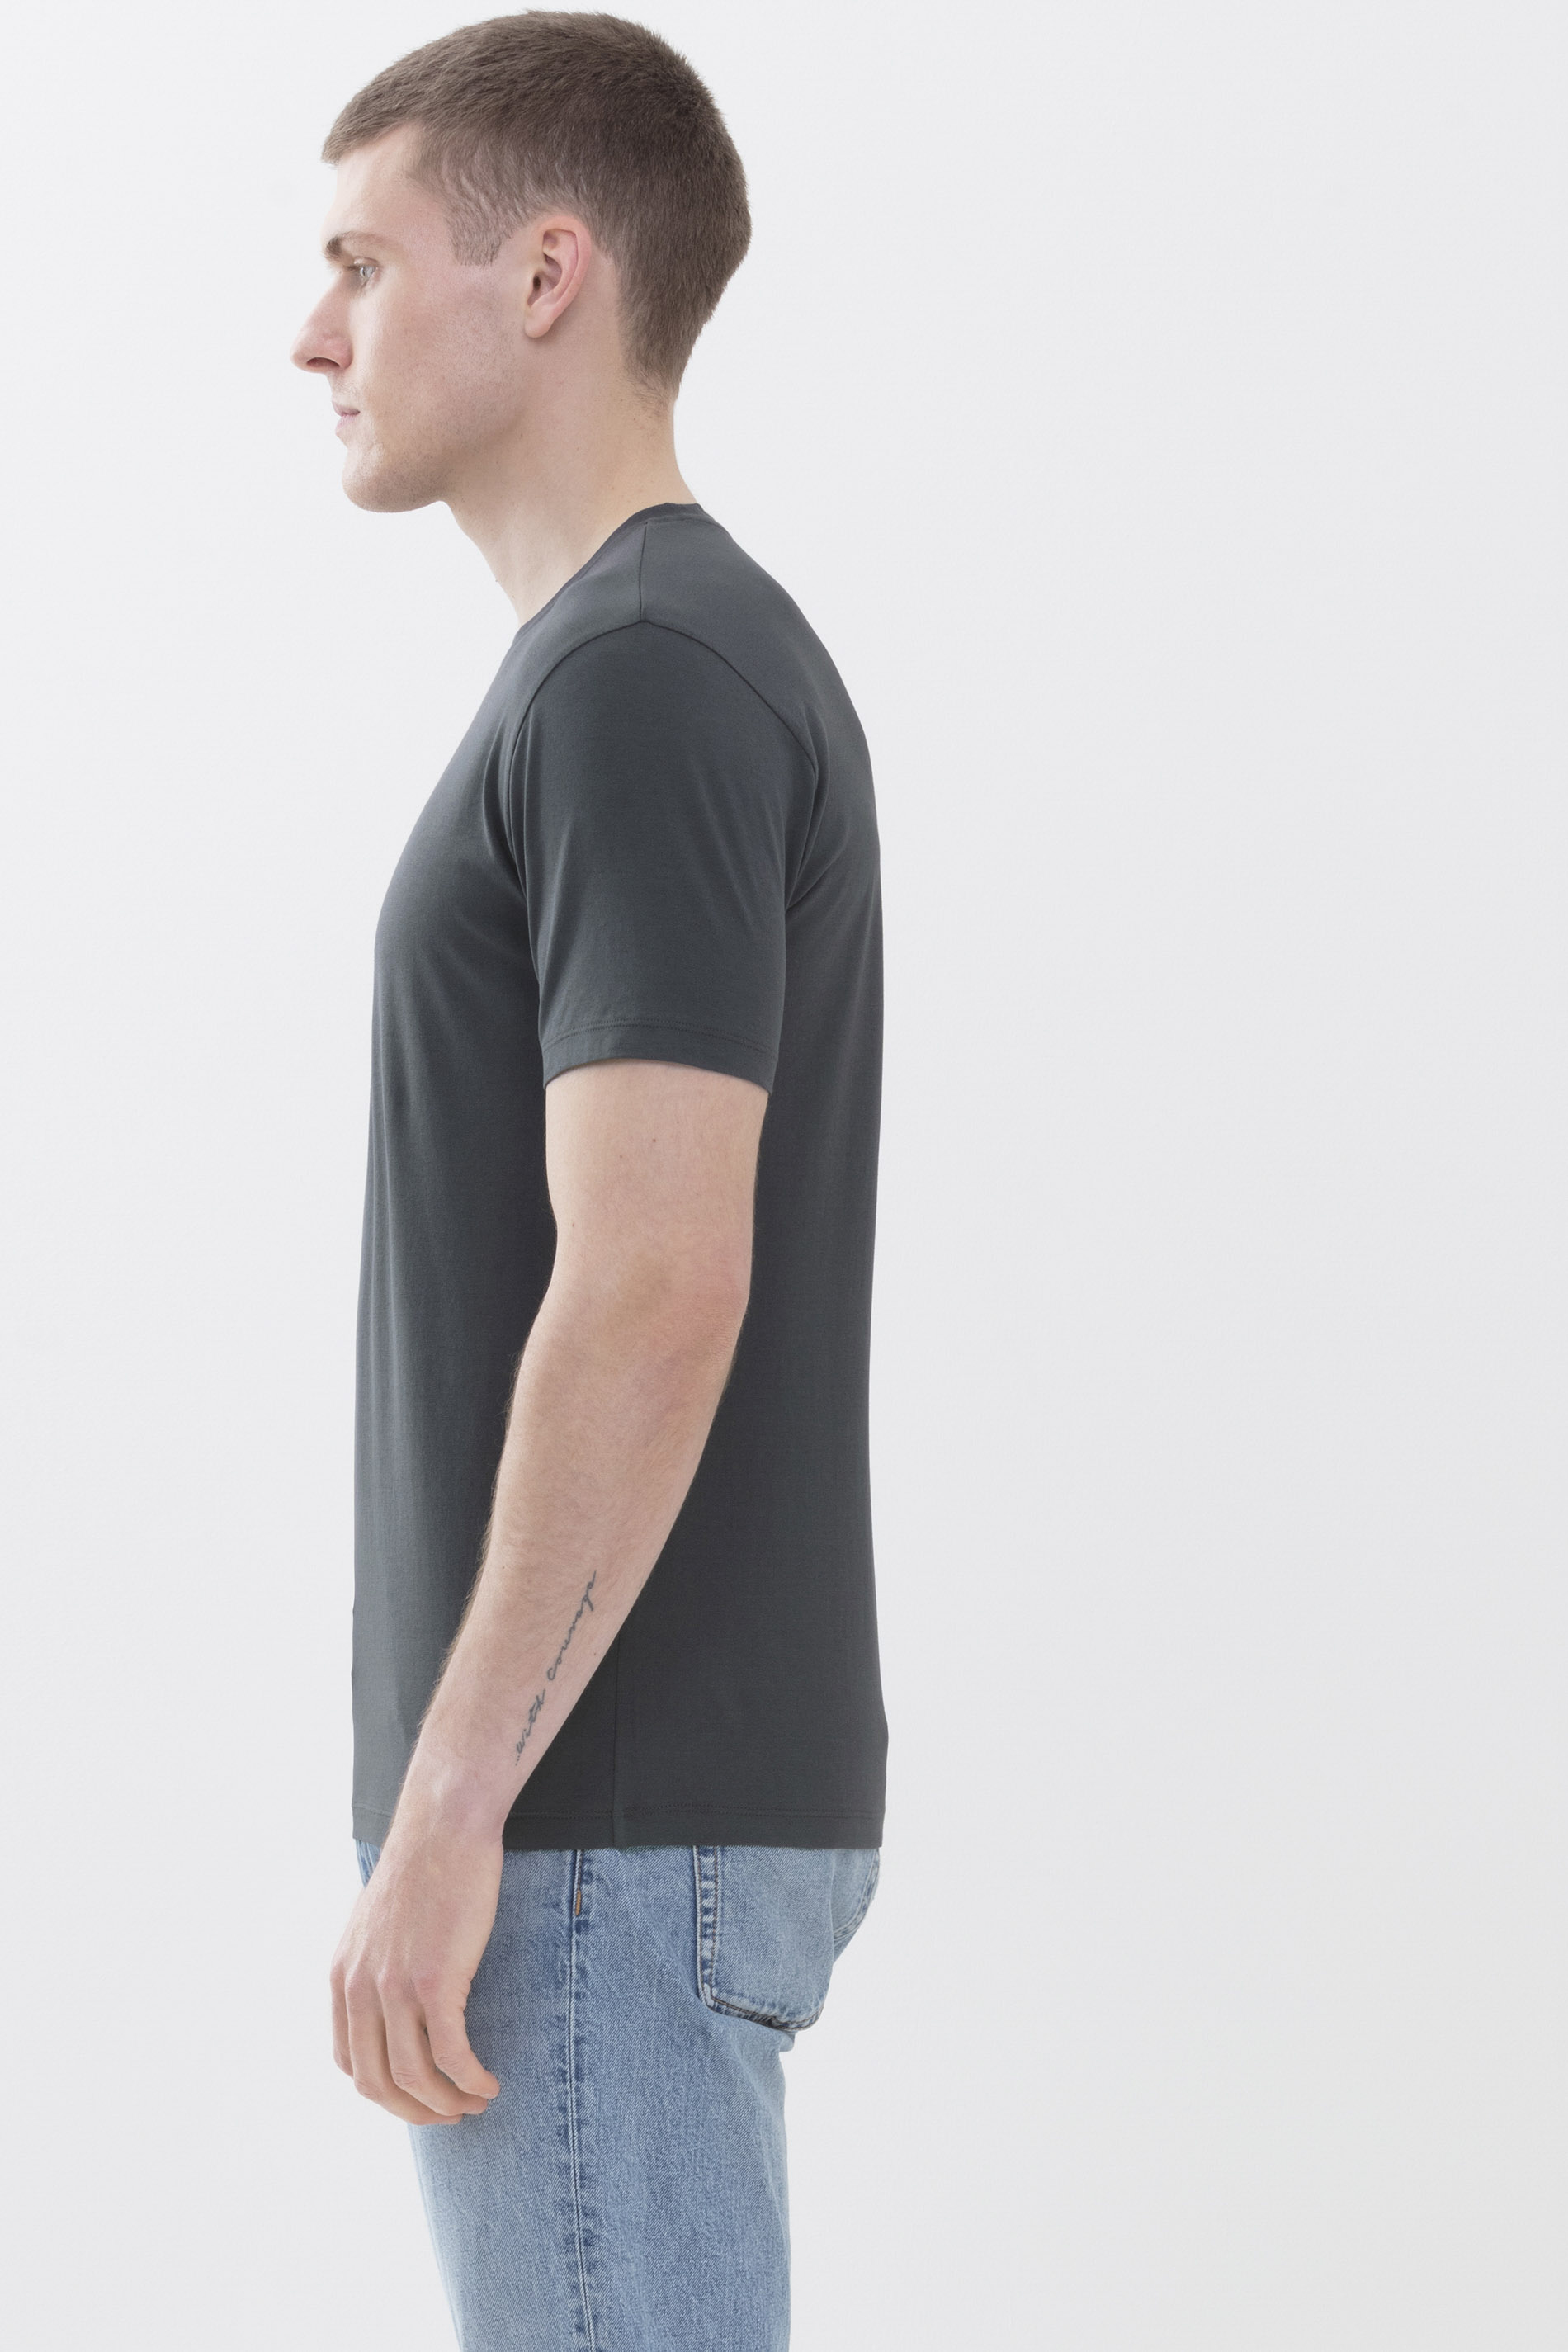 T-shirt Stormy Grey Serie Relax Detailweergave 02 | mey®